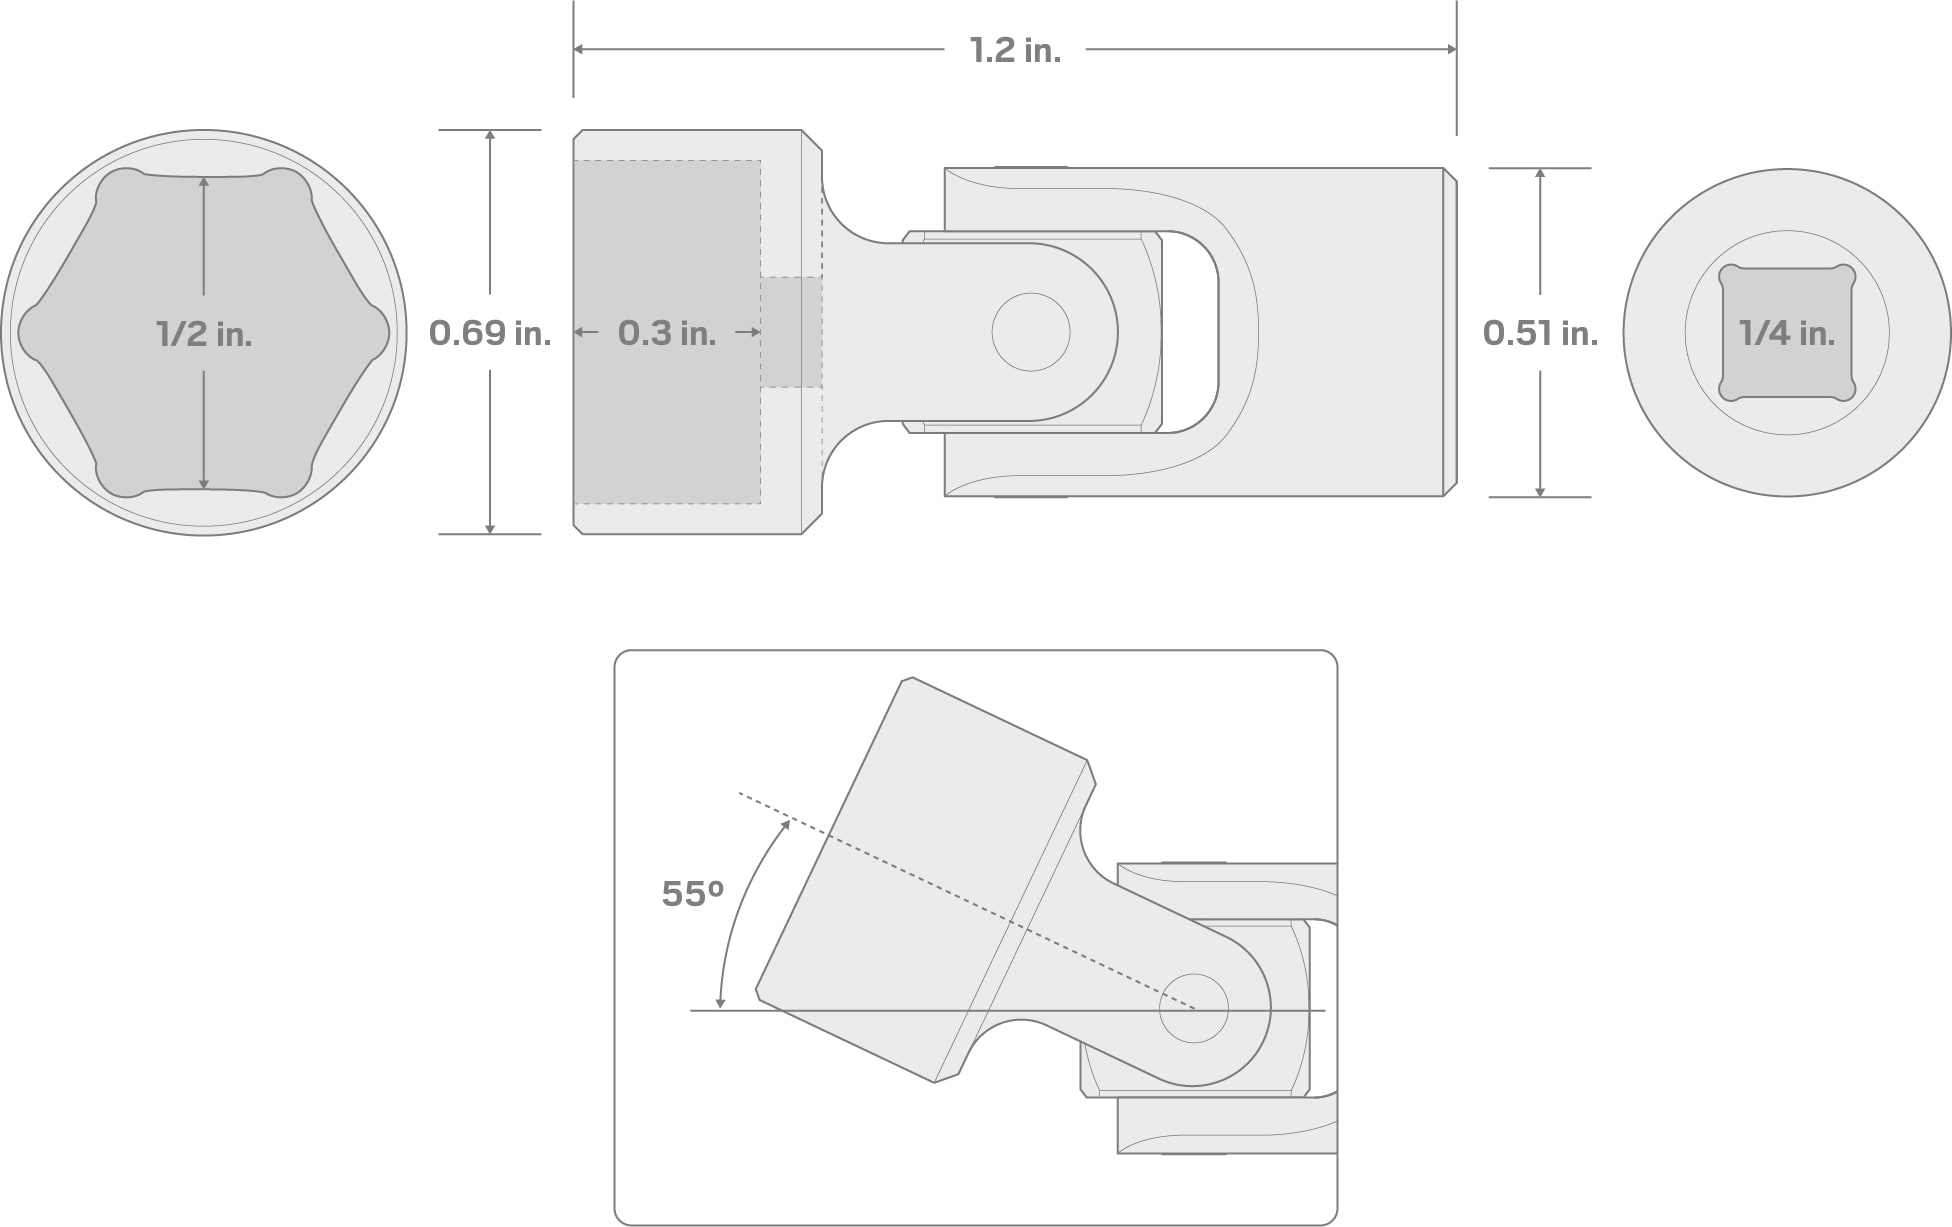 Specs for 1/4 Inch Drive x 1/2 Inch Universal Joint Socket